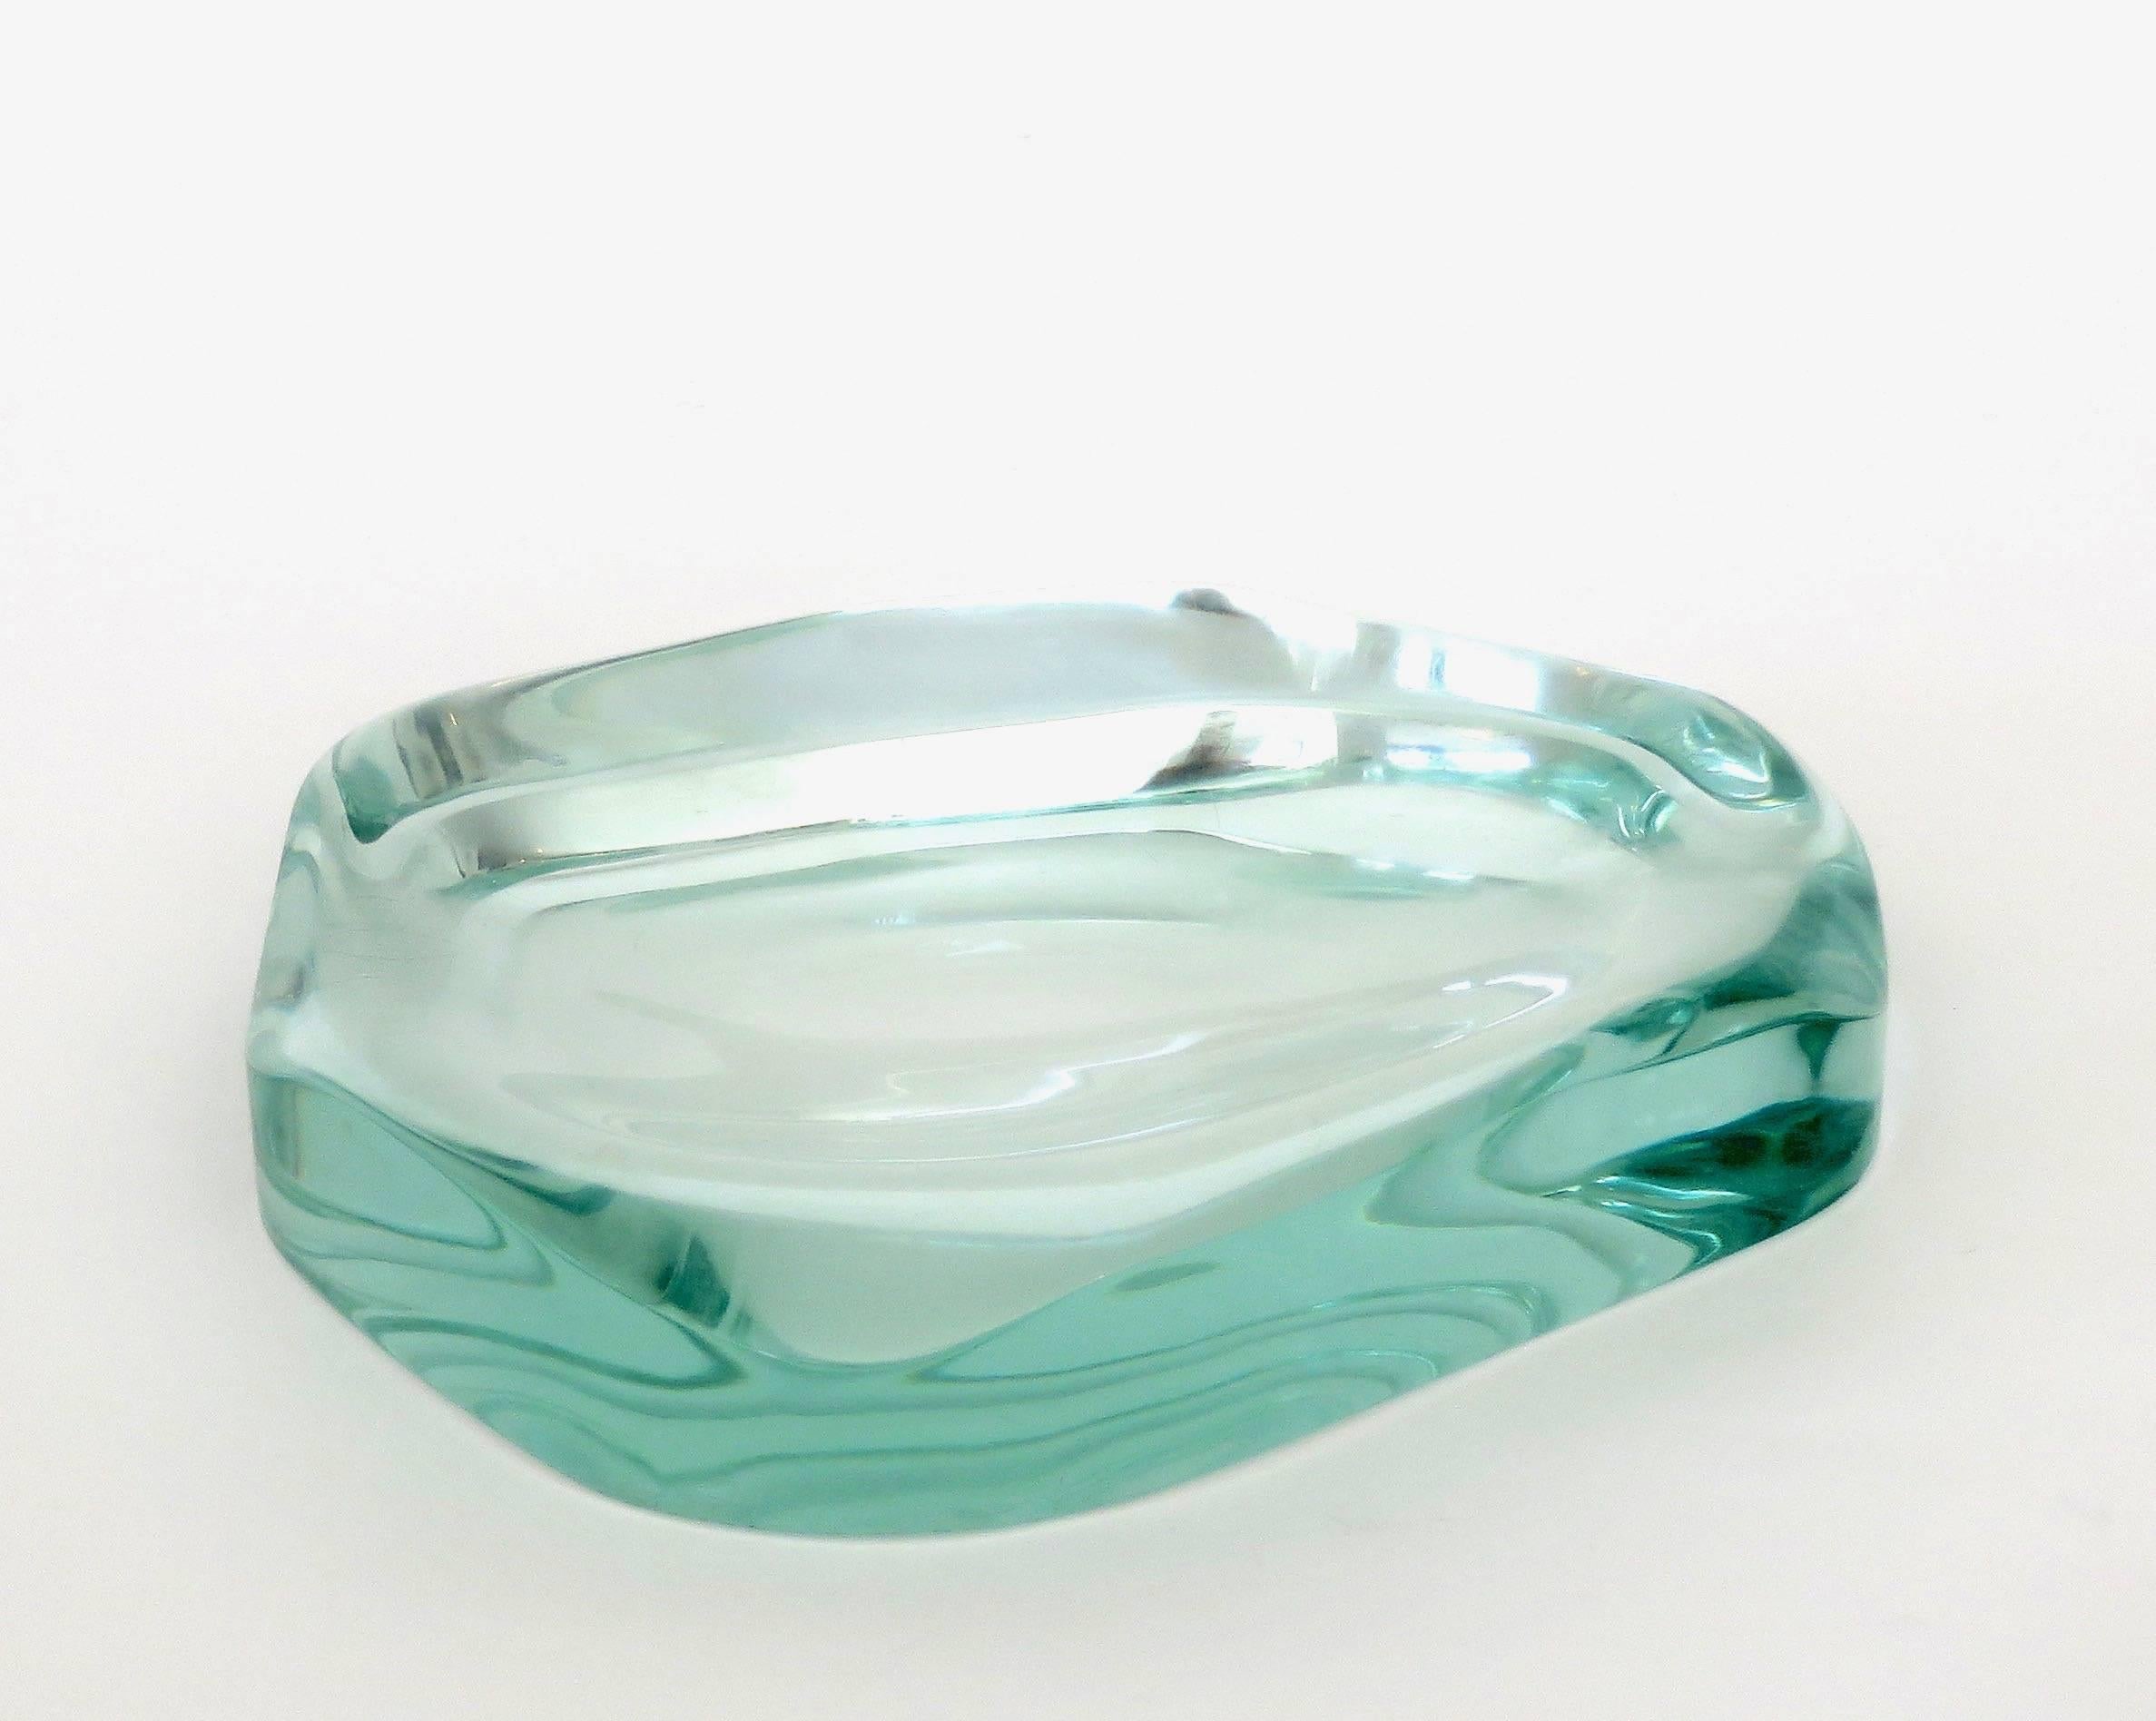 Round sculpted edge pale blue glass dish designed by Max Ingrand for Fontana Arte, circa 1960. Rare collectable crystal bowl, dish, candy dish or vide poche with wavy edges by Italian master designer Max Ingrand for Fontana Arte.